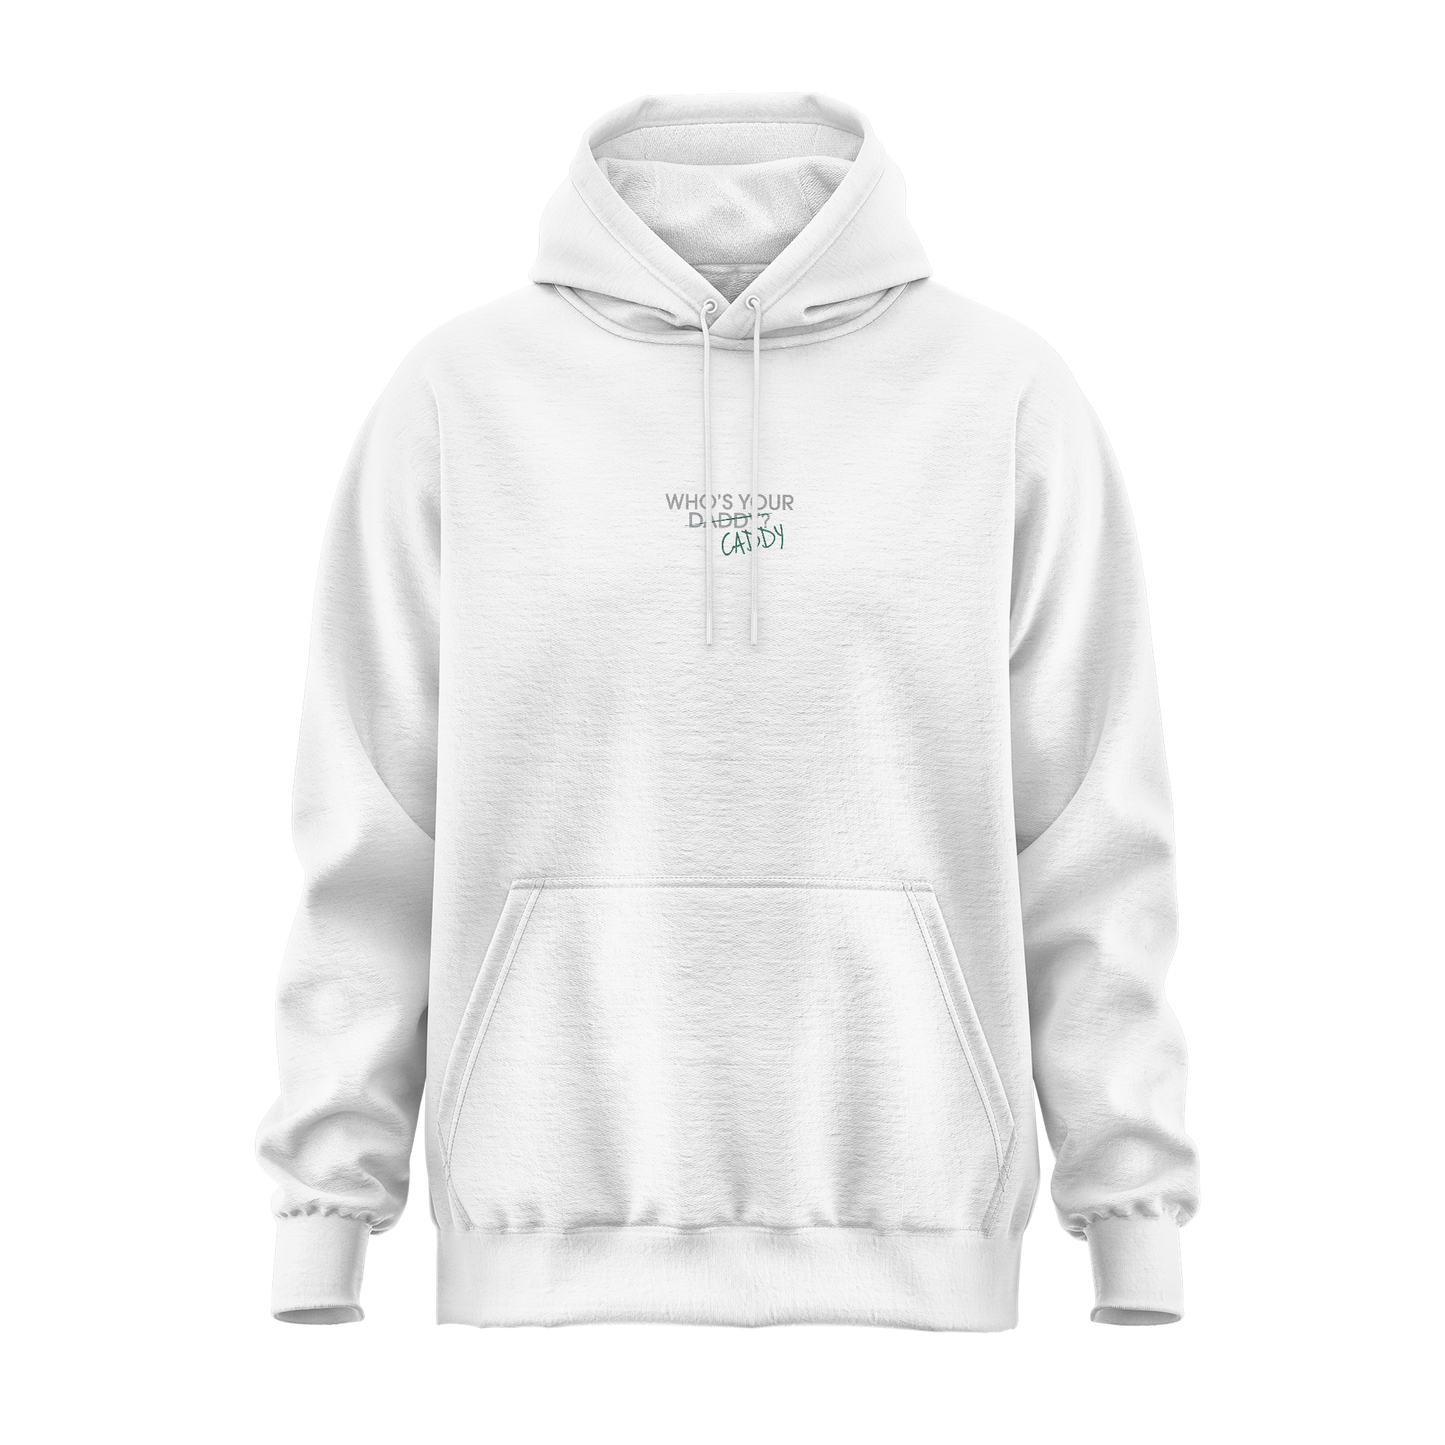 THE "WHO'S YOUR CADDY" HOODIE